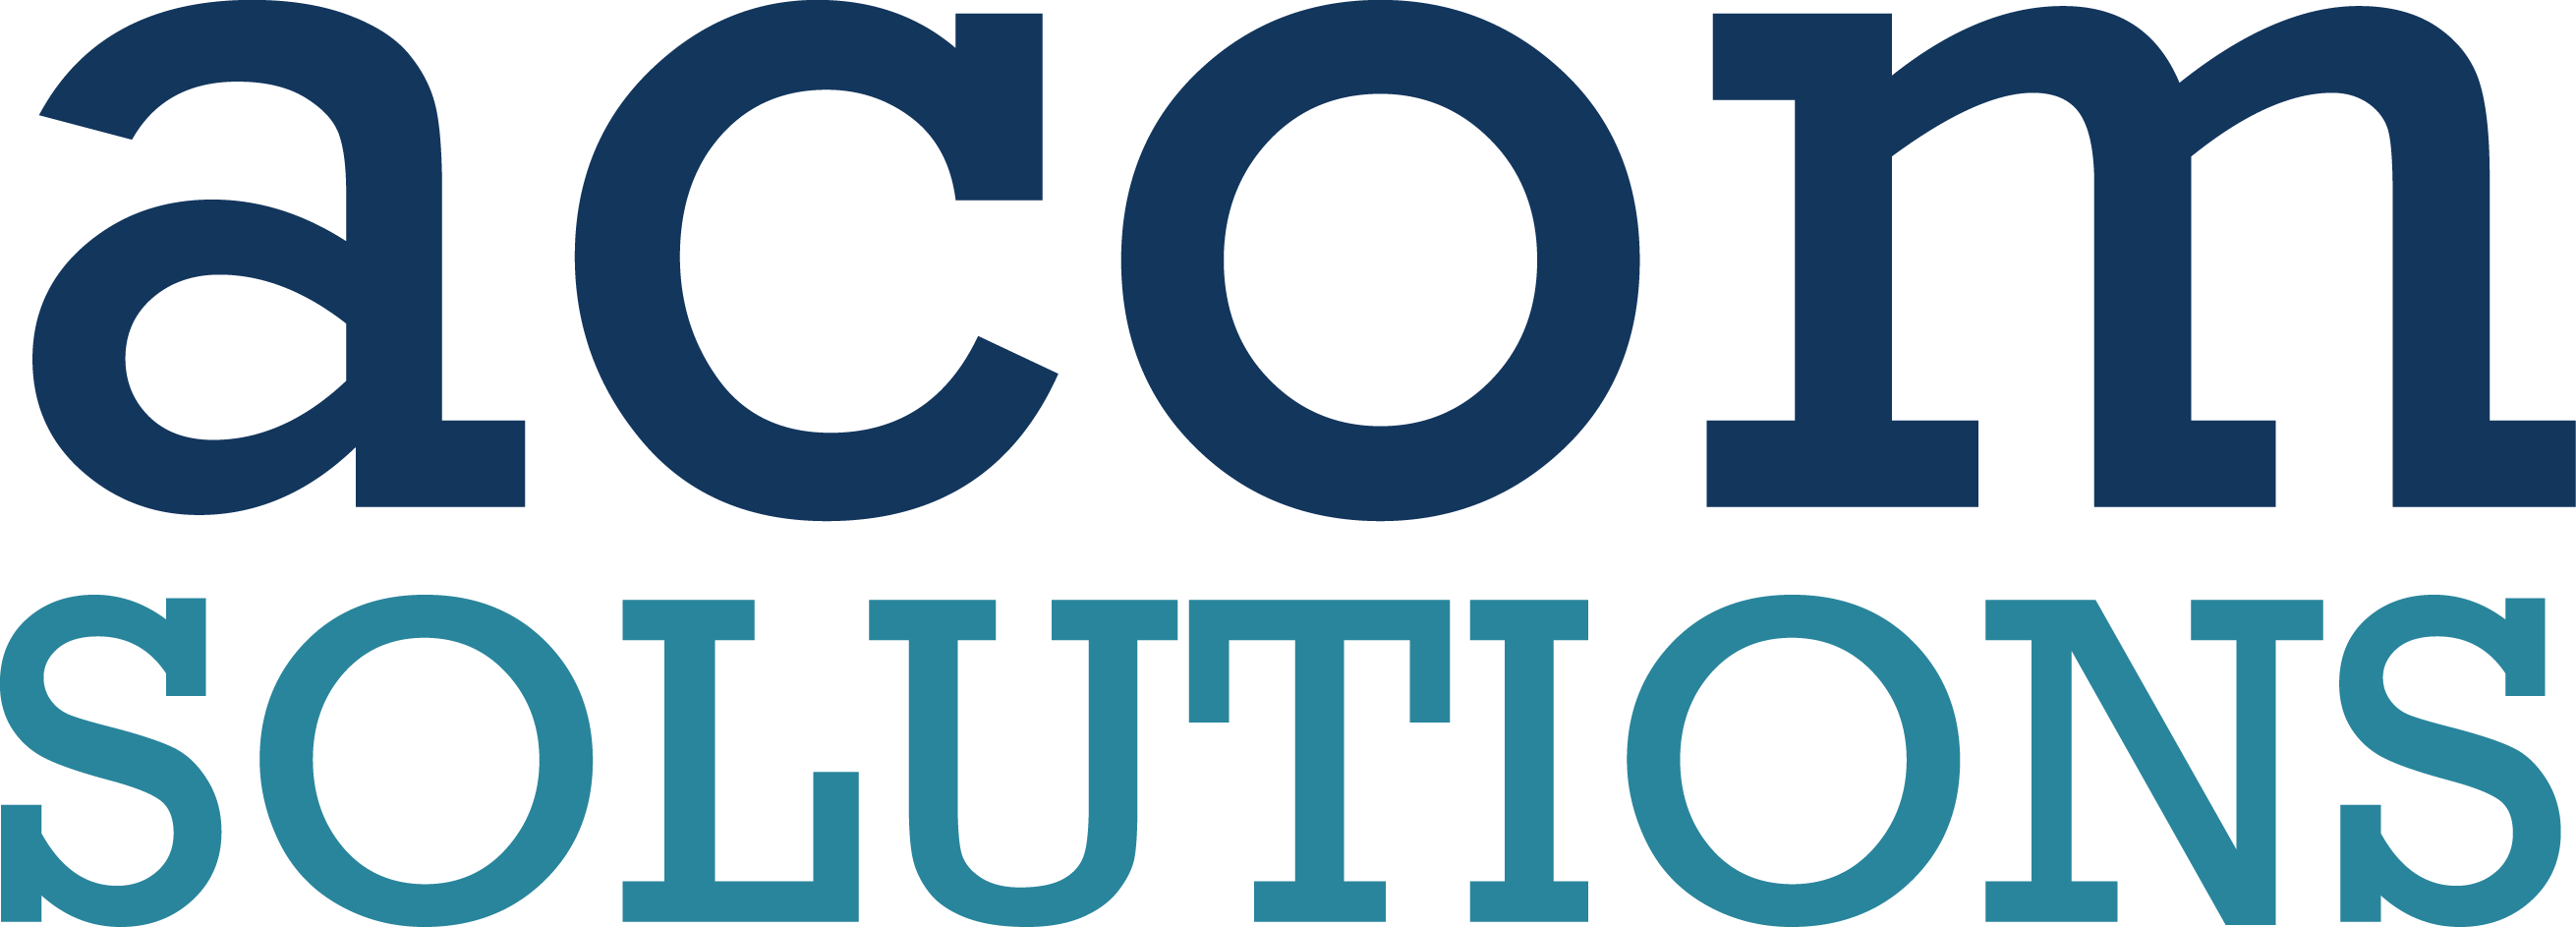 Acom Logo - ACOM Solutions and WEX Inc. Partner to Offer Clients a Complete